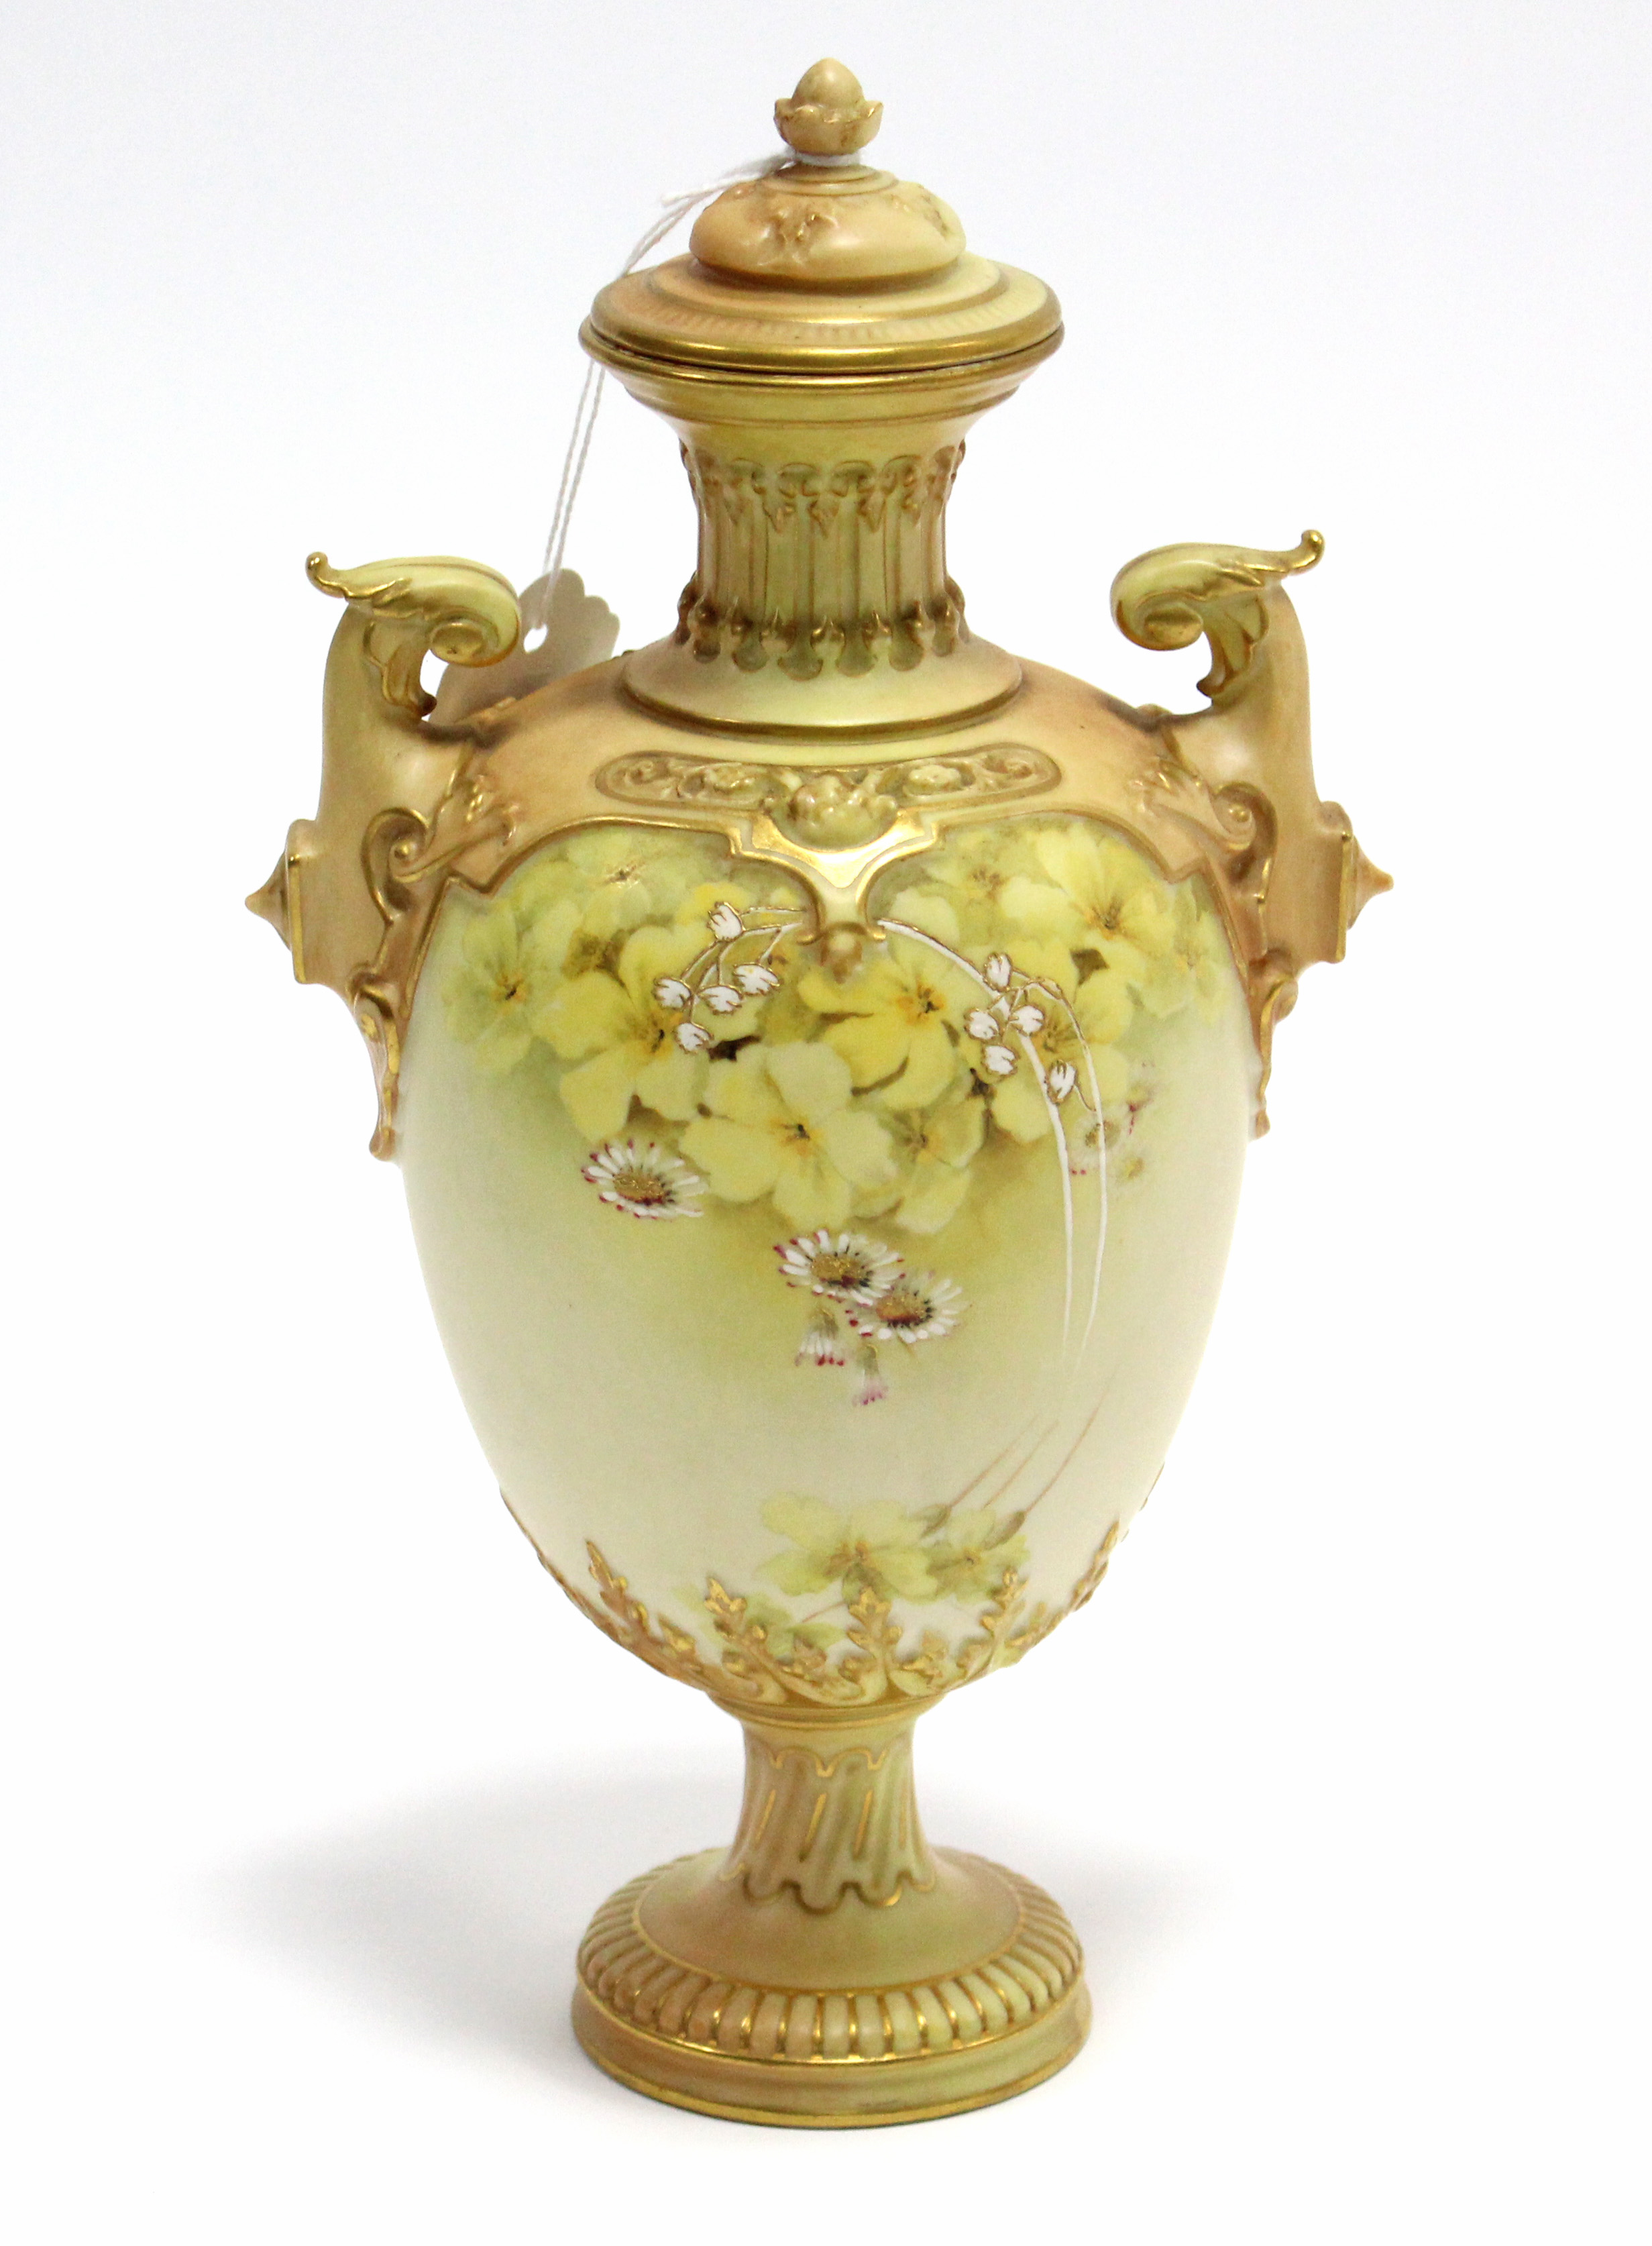 A late 19th century Royal Worcester porcelain ovoid two-handled vase & cover with yellow & white